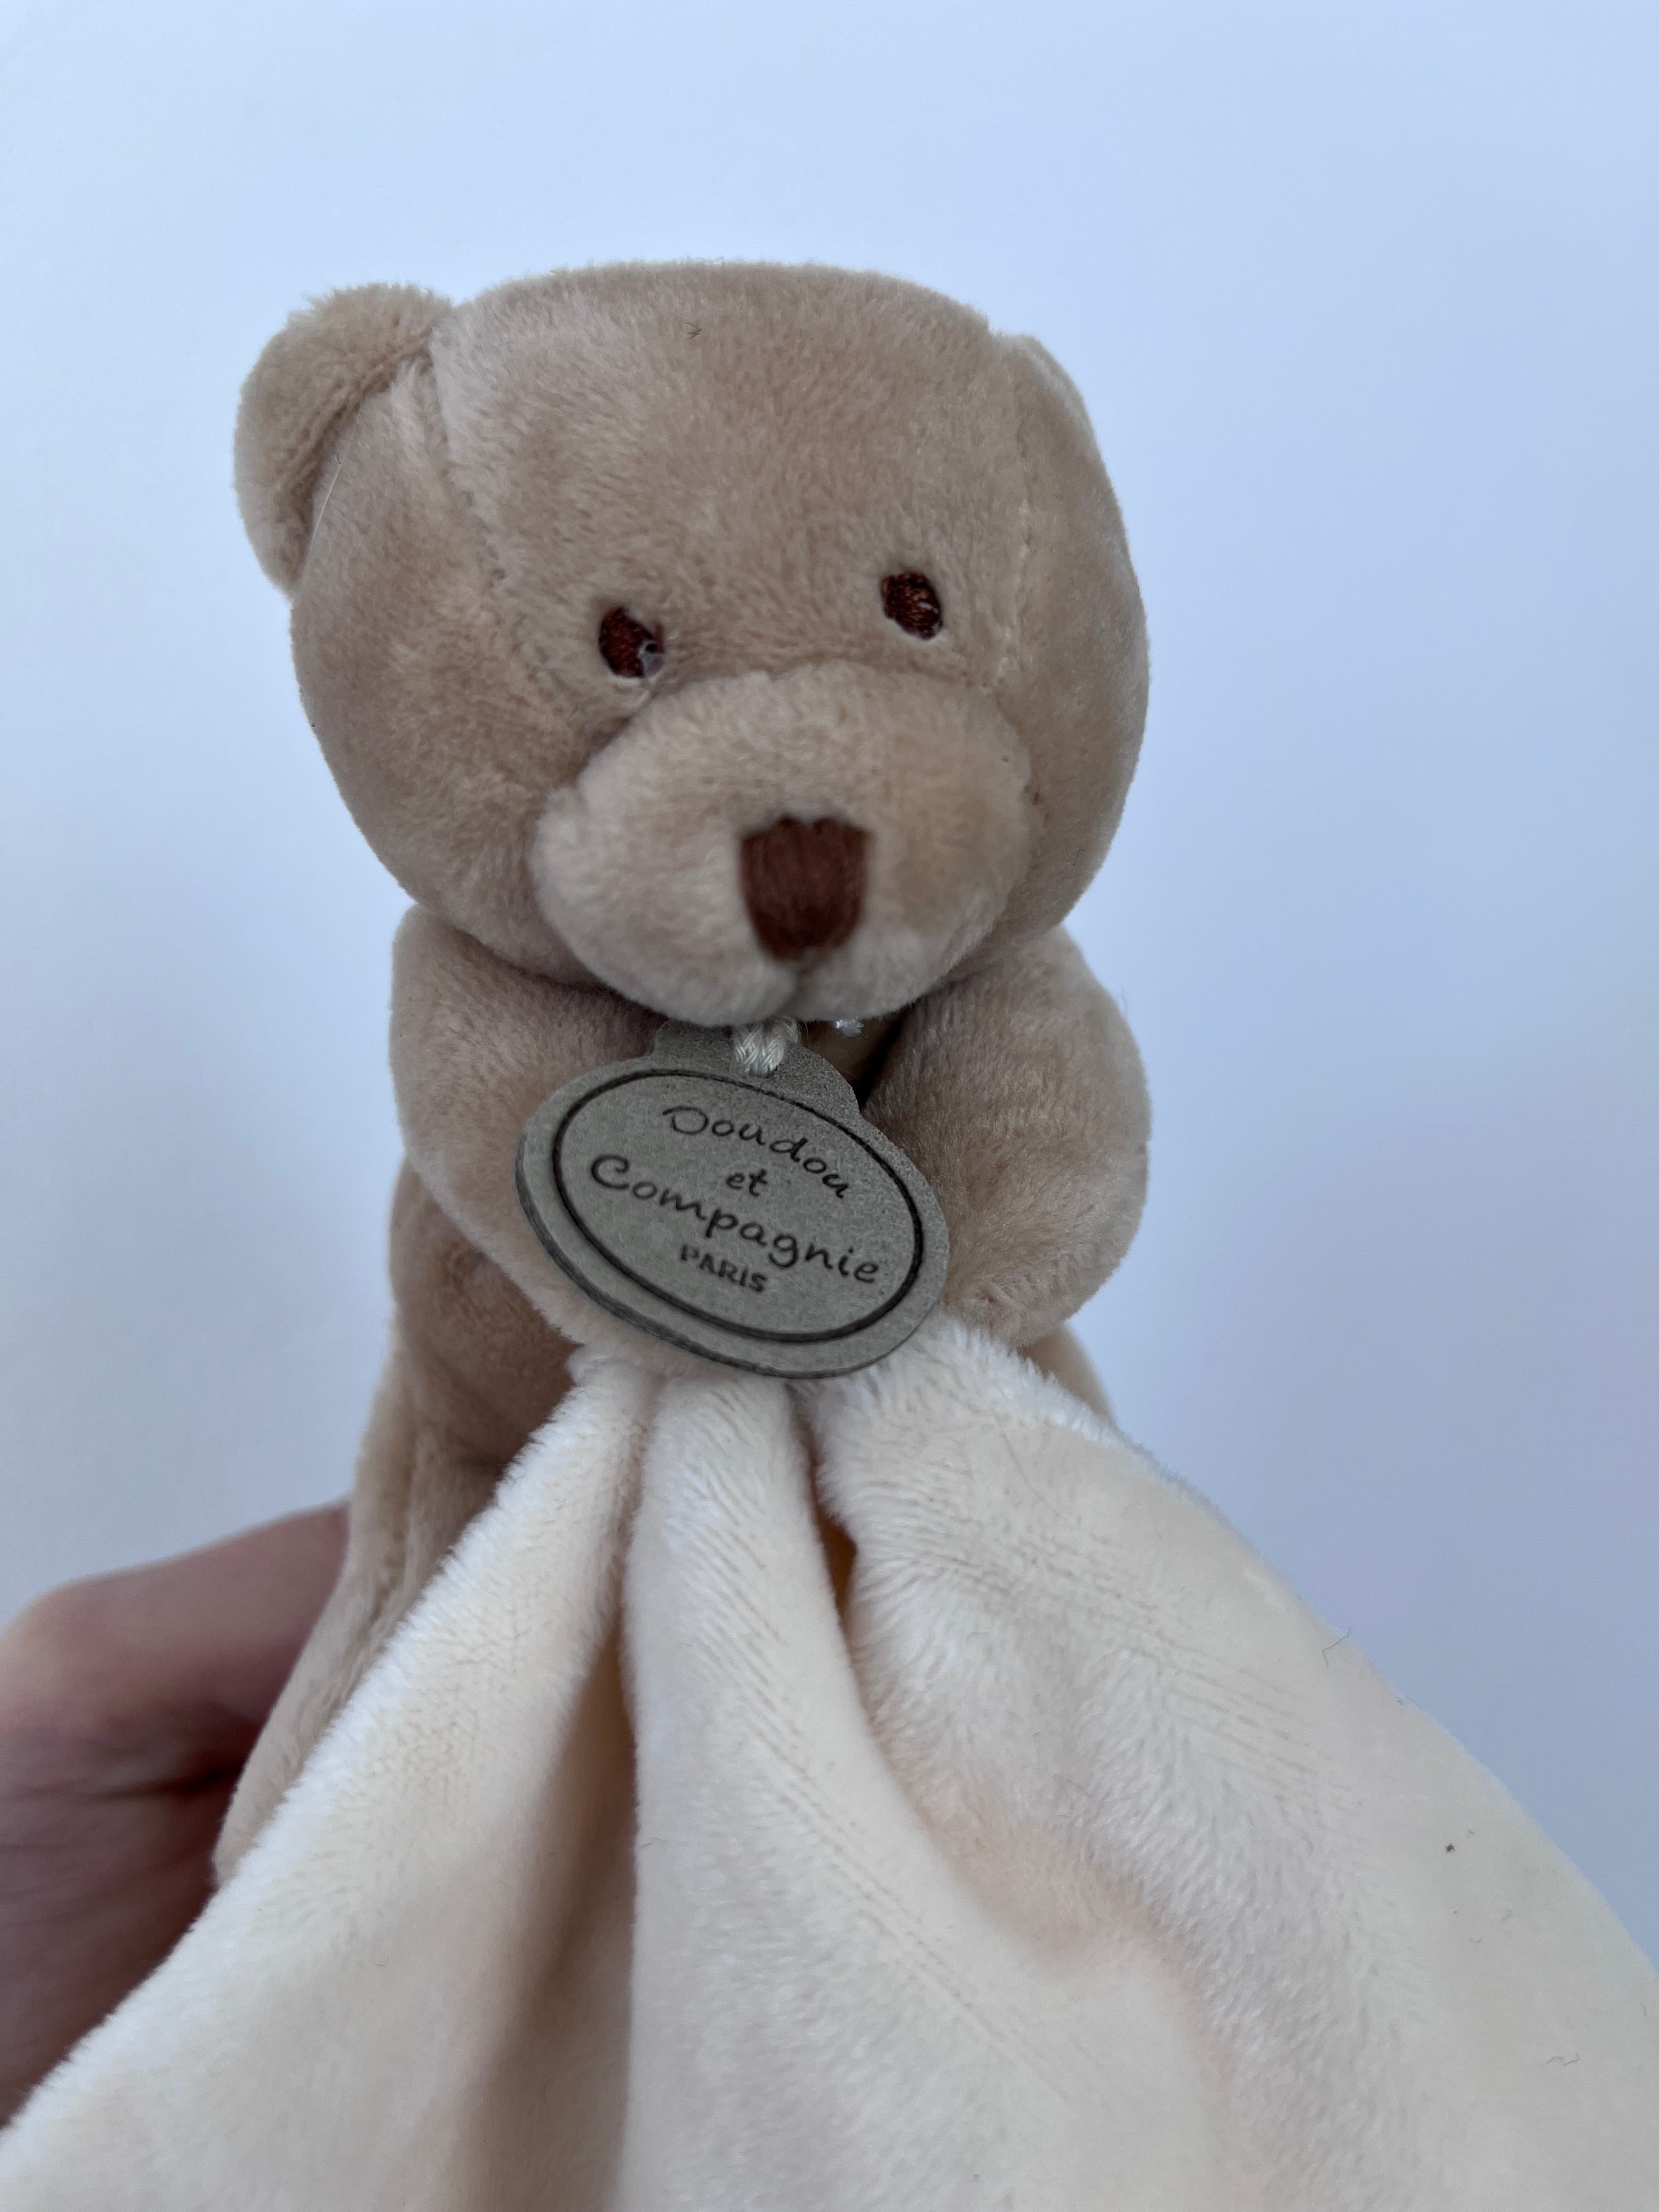 Doudou et Compagnie Baby Toy-Toys-Second Snuggle Preloved